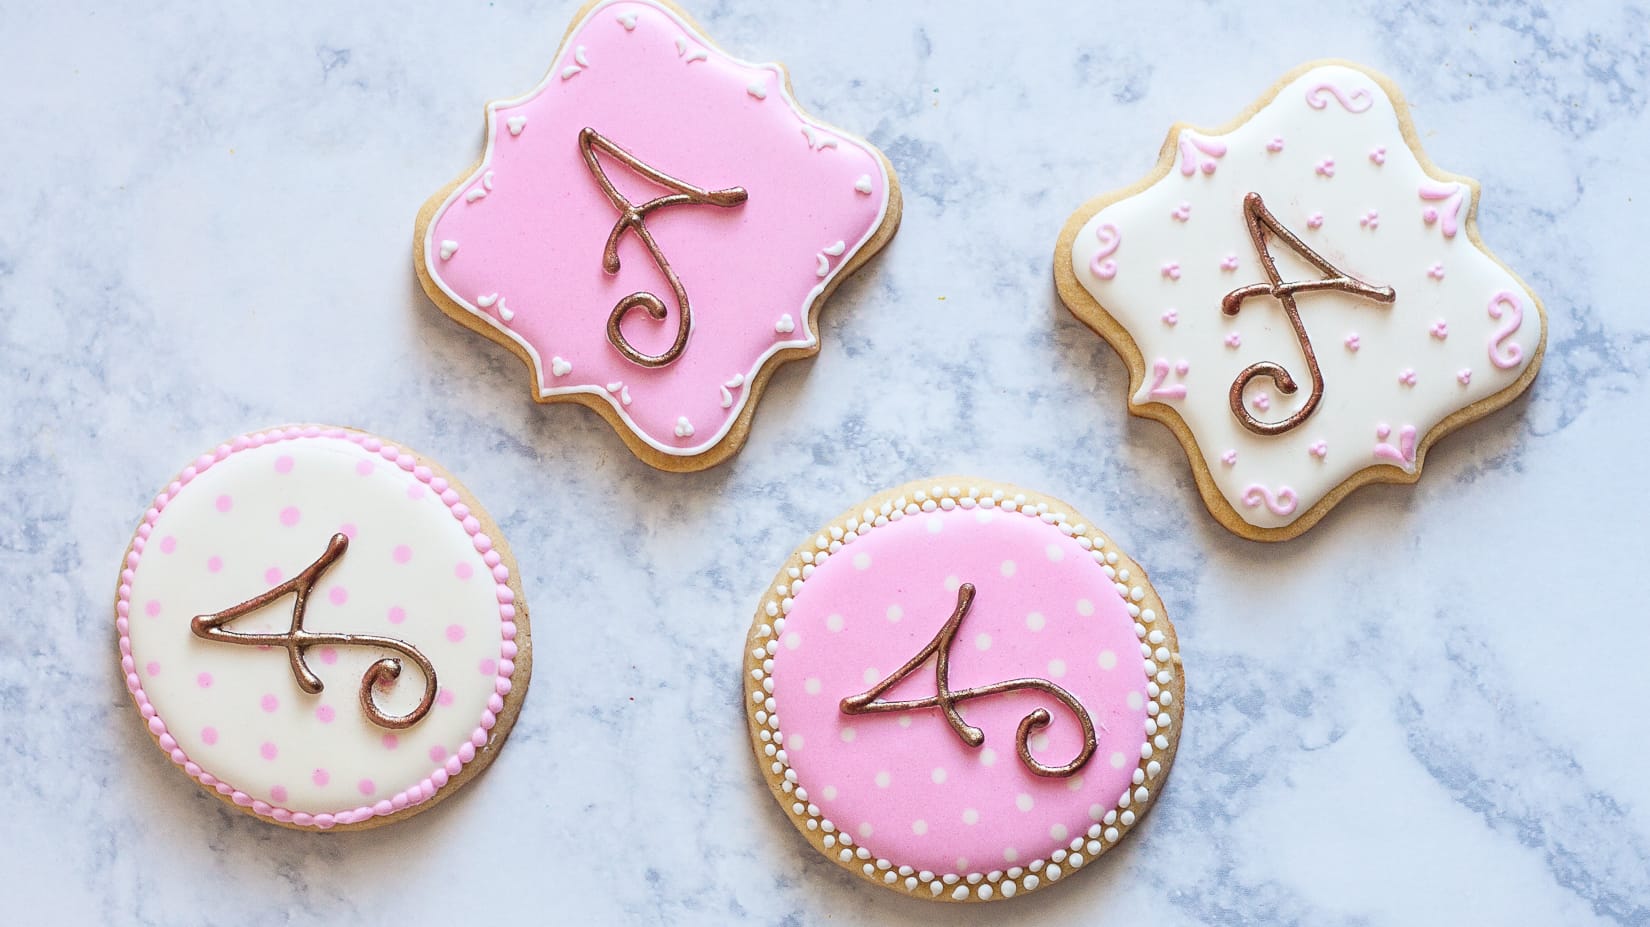 Custom Portrait Cookies without a Cookie Cutter or Projector